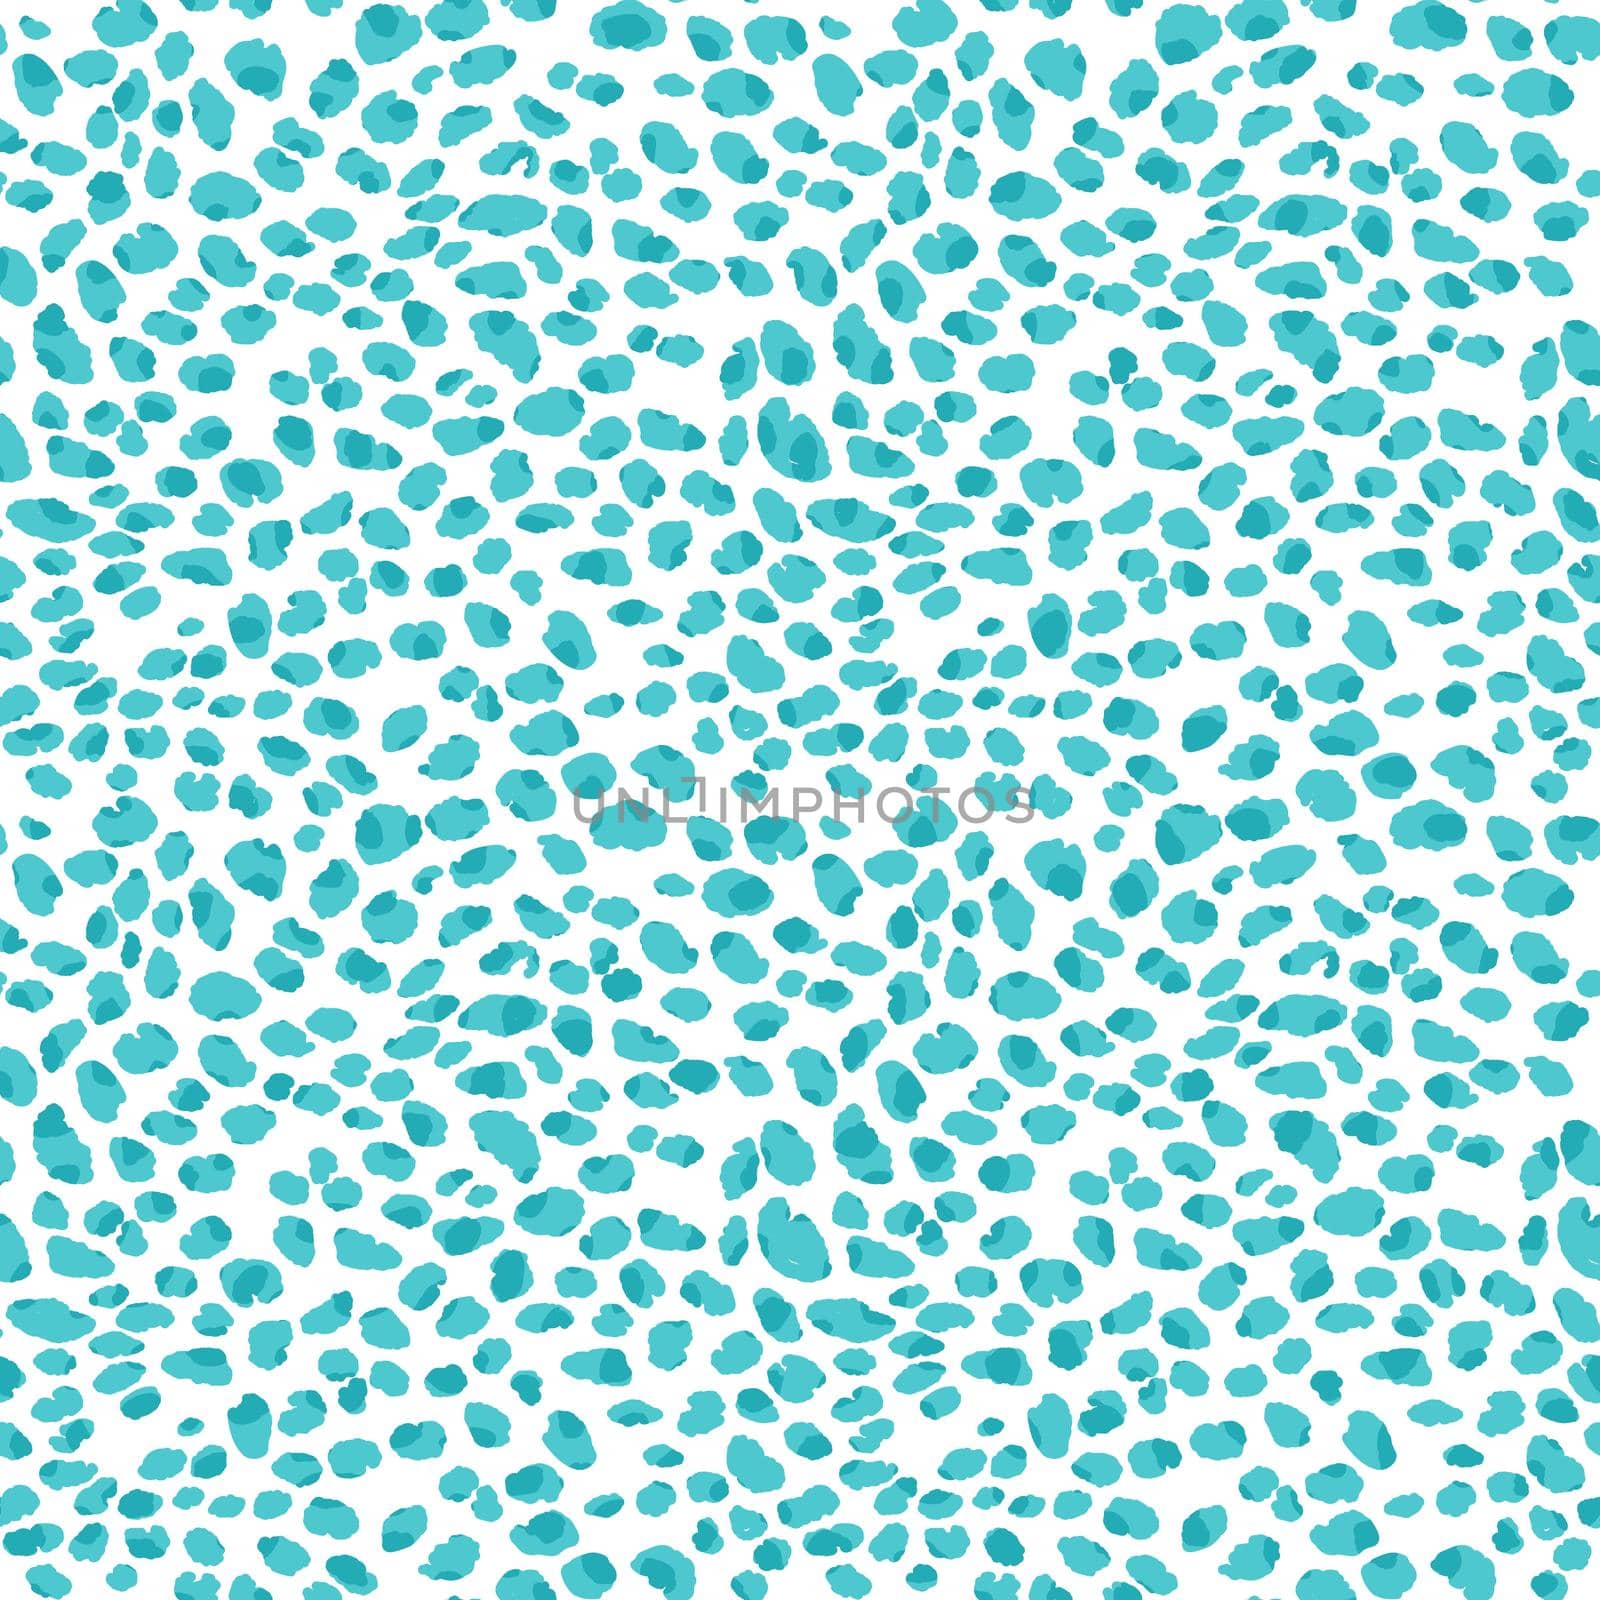 Abstract modern leopard seamless pattern. Animals trendy background. Blue and black decorative vector stock illustration for print, card, postcard, fabric, textile. Modern ornament of stylized skin. by allaku